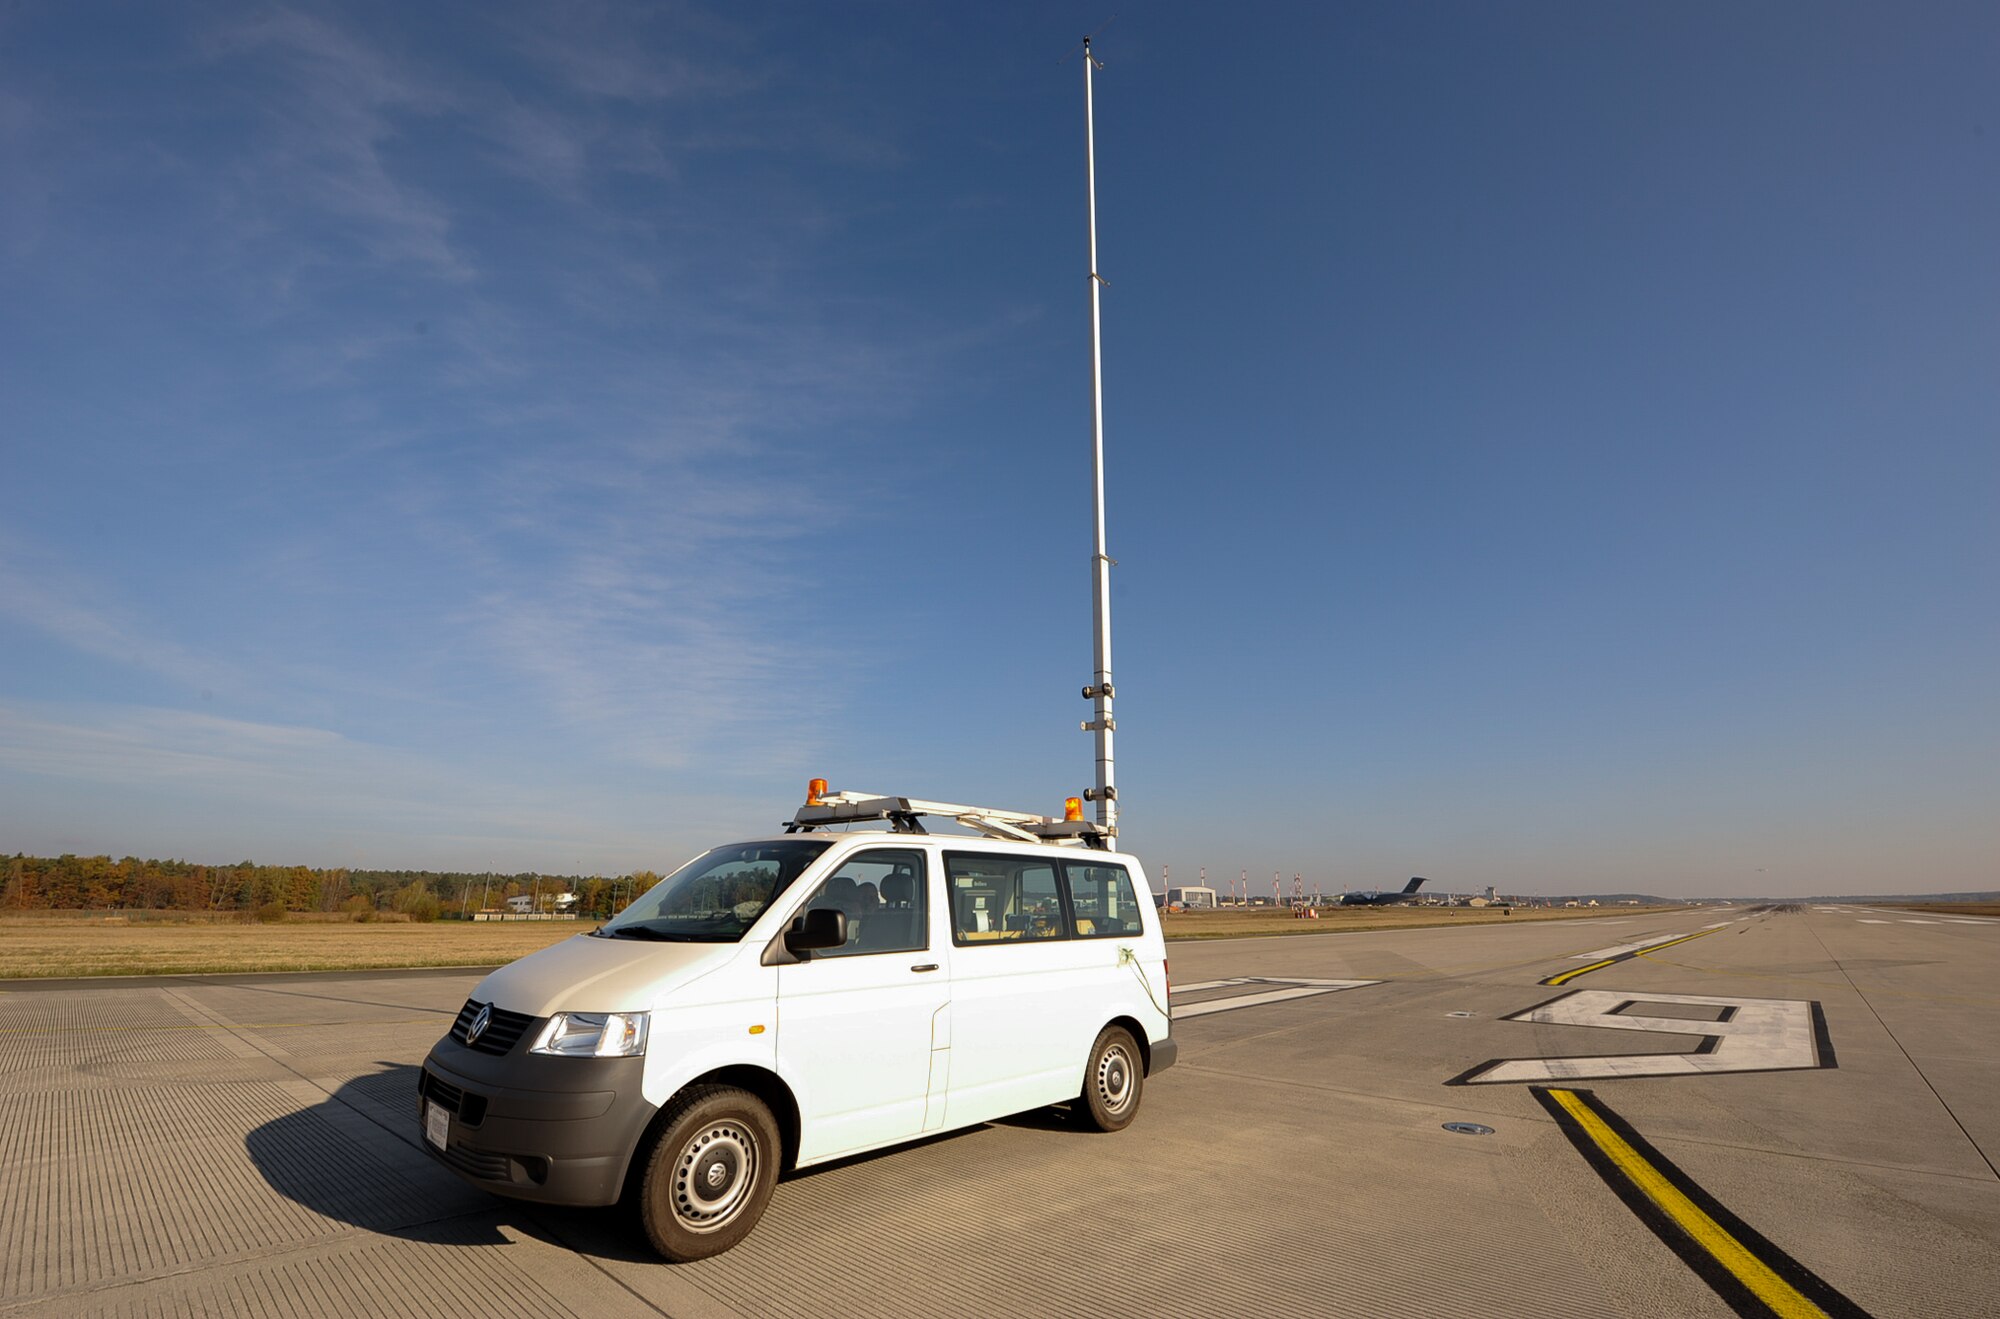 An 86th Operations Support Squadron vehicle sits on the flight line at Ramstein Air Base, Germany, Nov. 14, 2016. The Air Traffic Control and Landing Systems flight uses a specially built test vehicle to drive the length of the runway several times with an antenna 12 meters in height to simulate an aircraft and ensure the signals are being brought directly down the centerline. This system is a zero visibility-auto land system that requires additional checks to verify the system is performing as required. (U.S. Air Force photo by Airman 1st Class Savannah L. Waters)